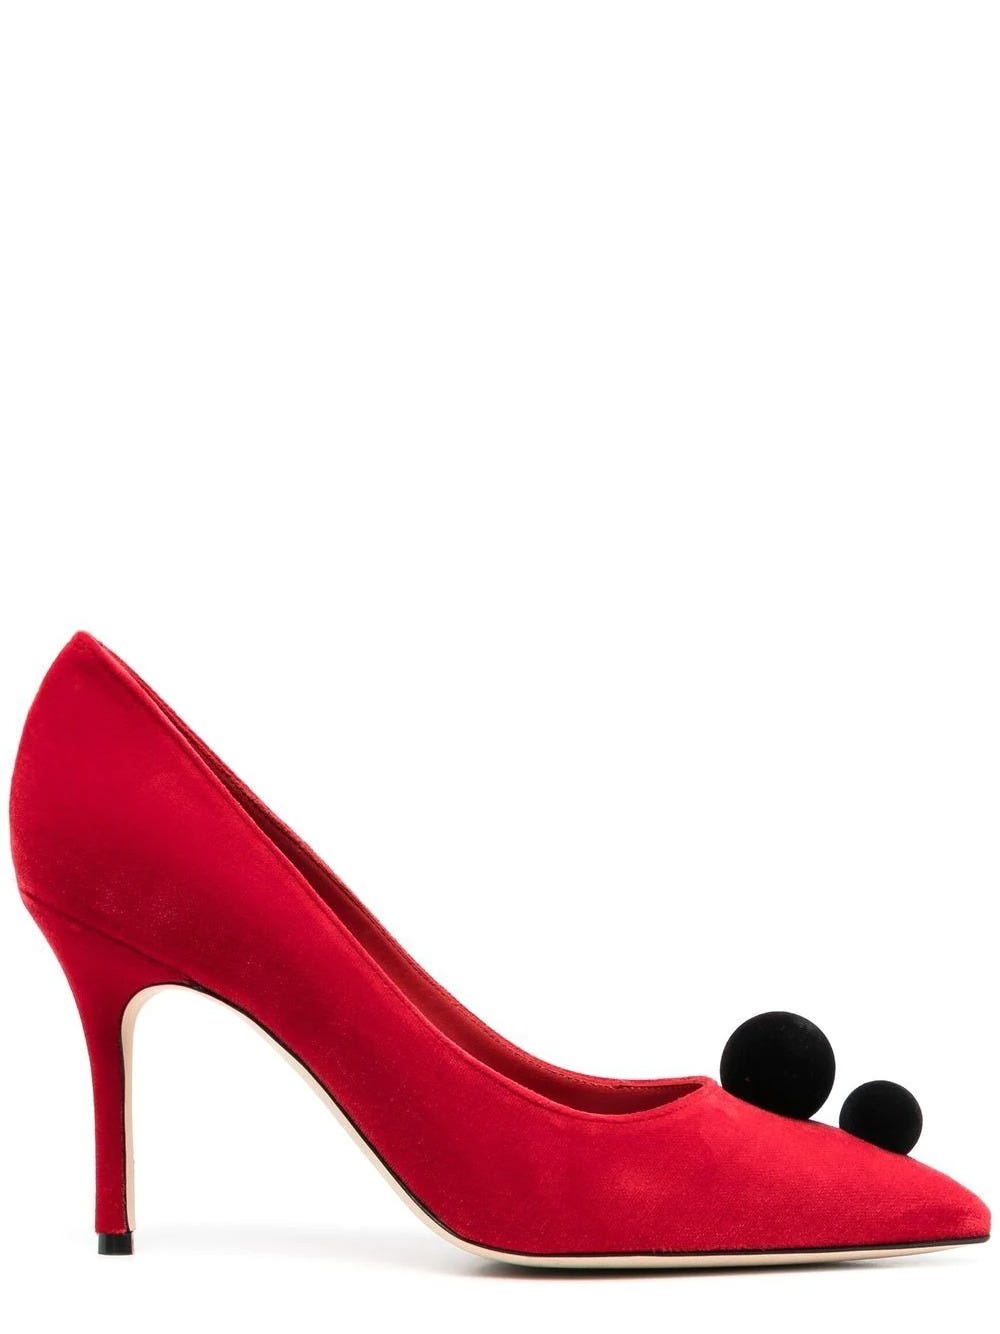 MANOLO BLAHNIK RED PIERA PUMPS EMBELLISHED WITH POMPOMS